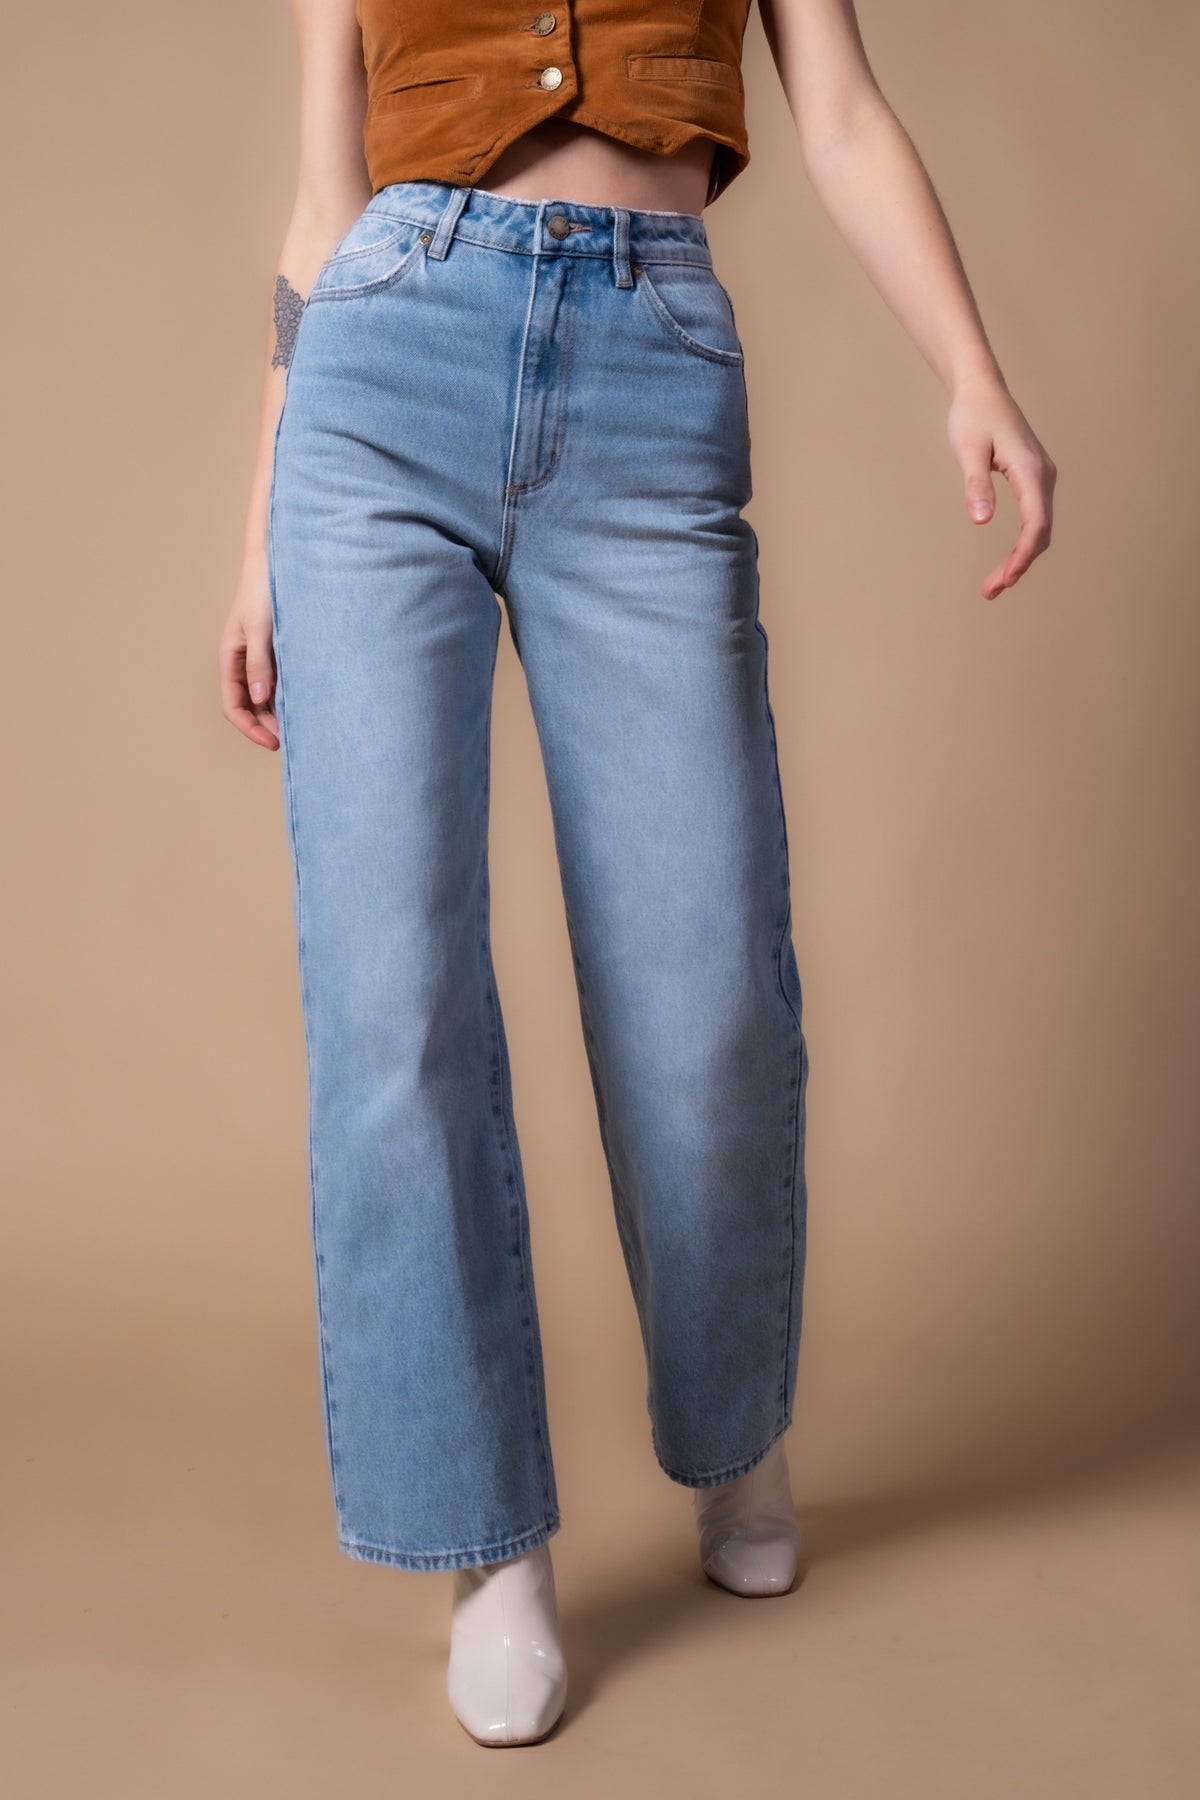 Rolla's Heidi Ankle Jeans - Old Stone